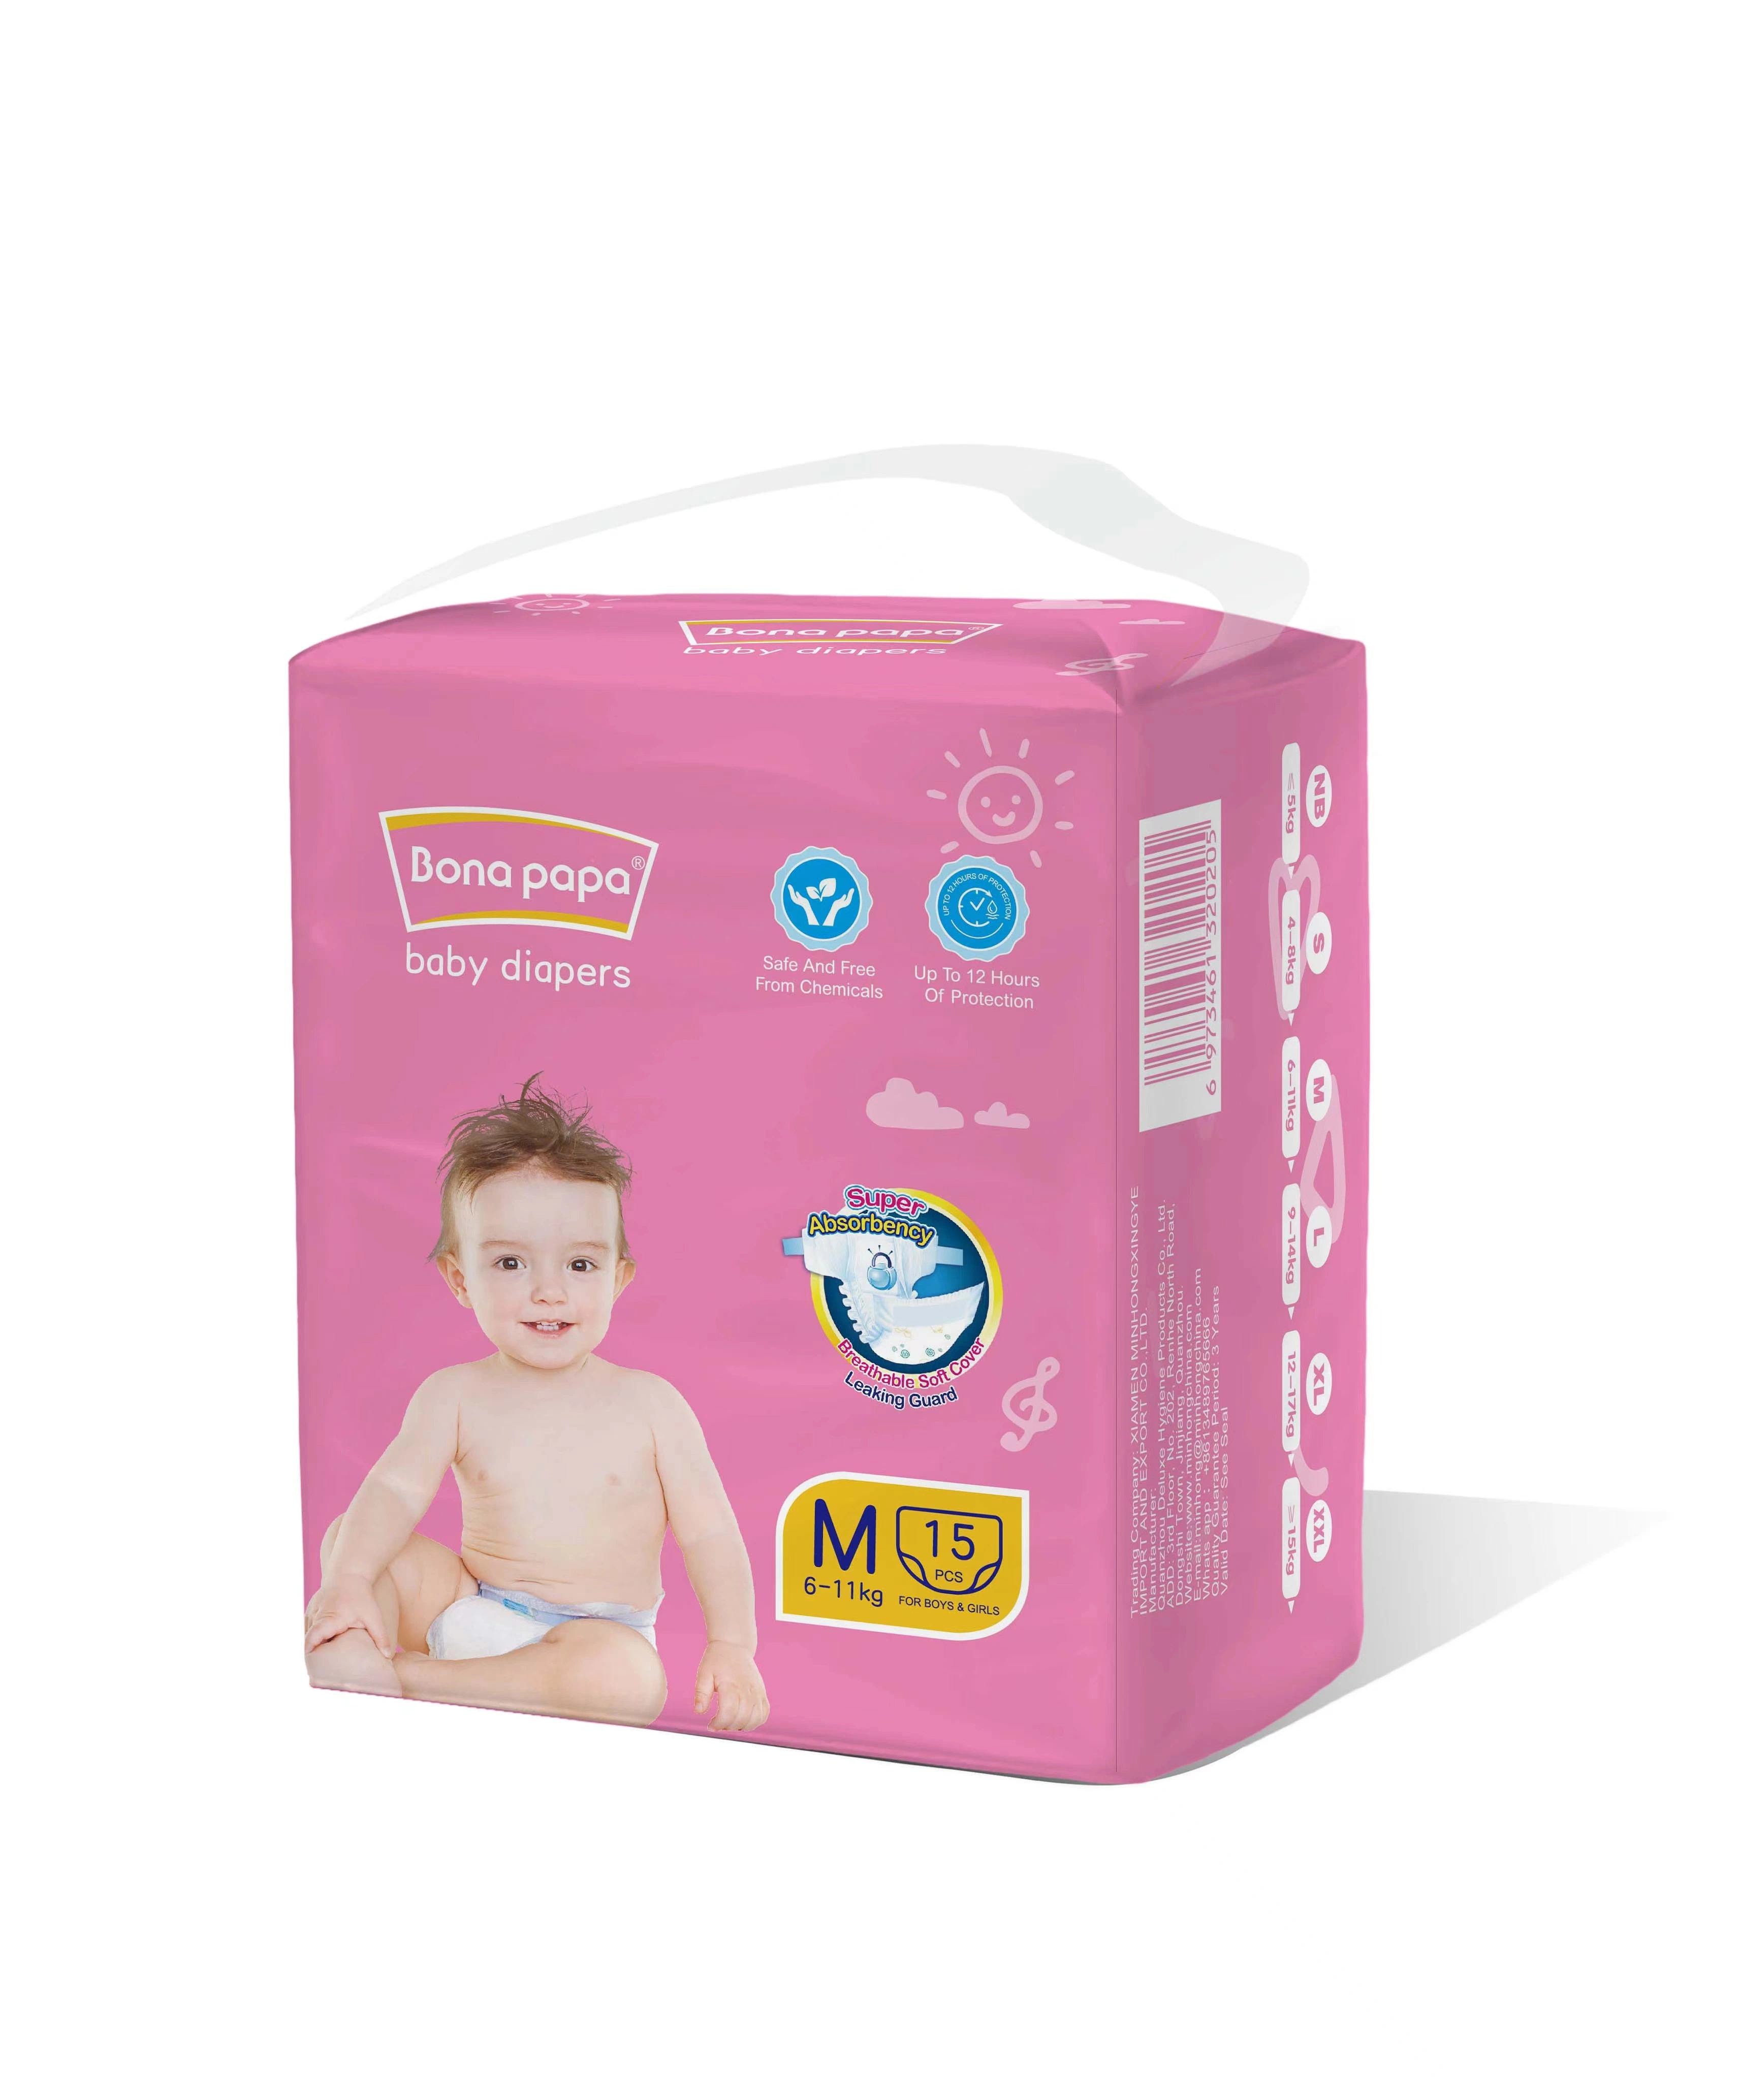 Hot Selling Wholesale/Supplier Premium Quality Ultra Soft High Absorption Cheap Price Breathable Care Baby Comfortable Diaper Nappy Items Made in China